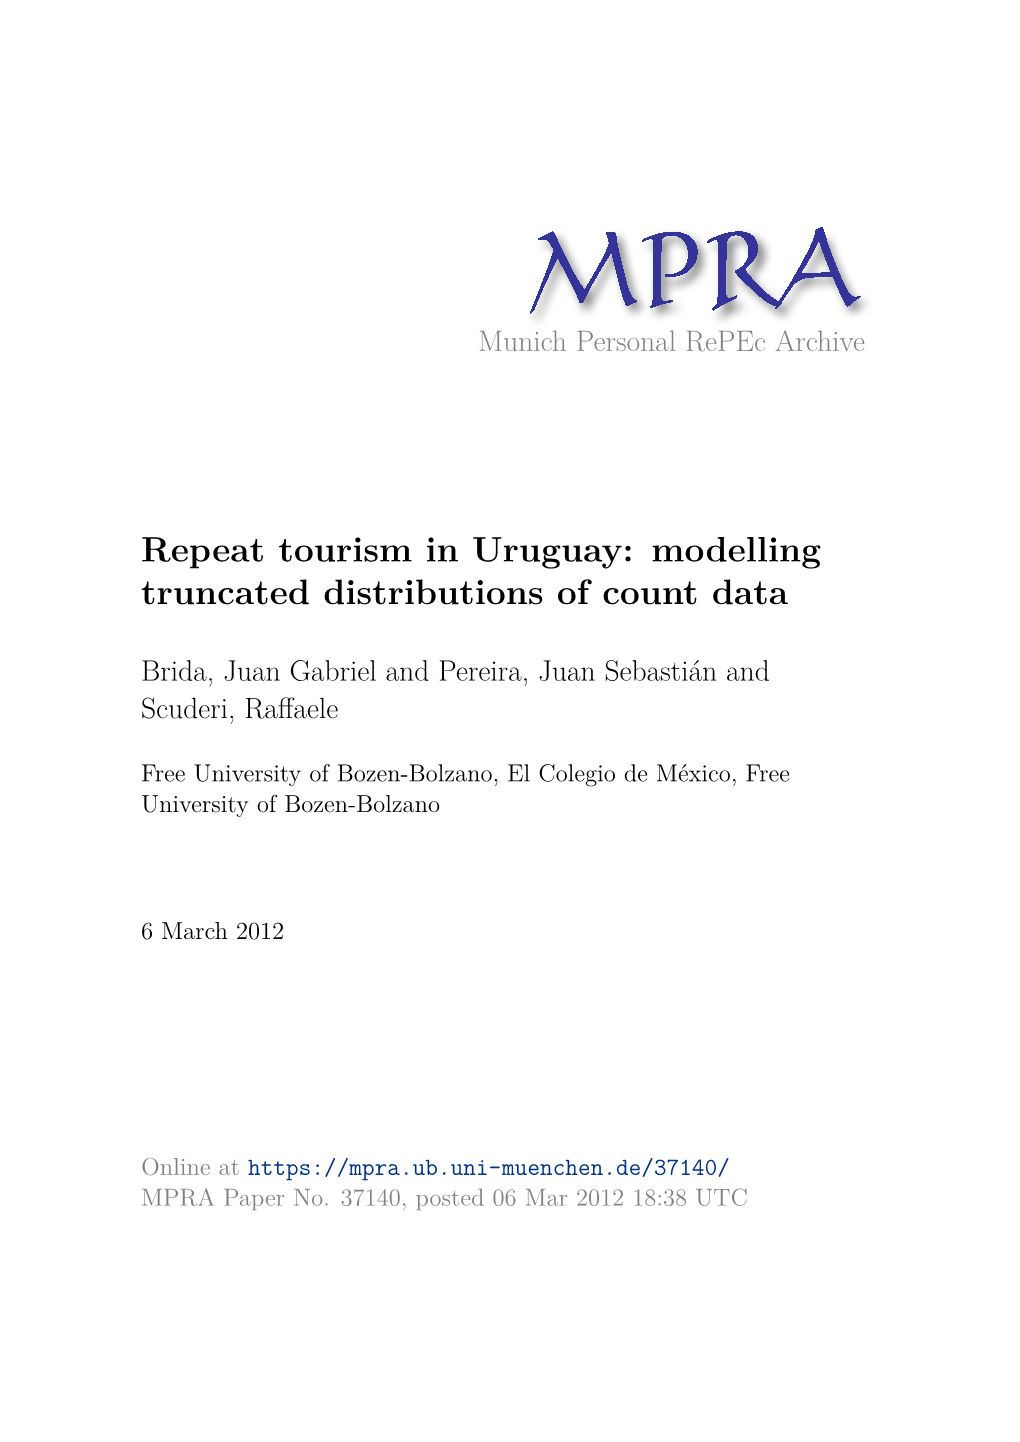 Repeat Tourism in Uruguay: Modelling Truncated Distributions of Count Data